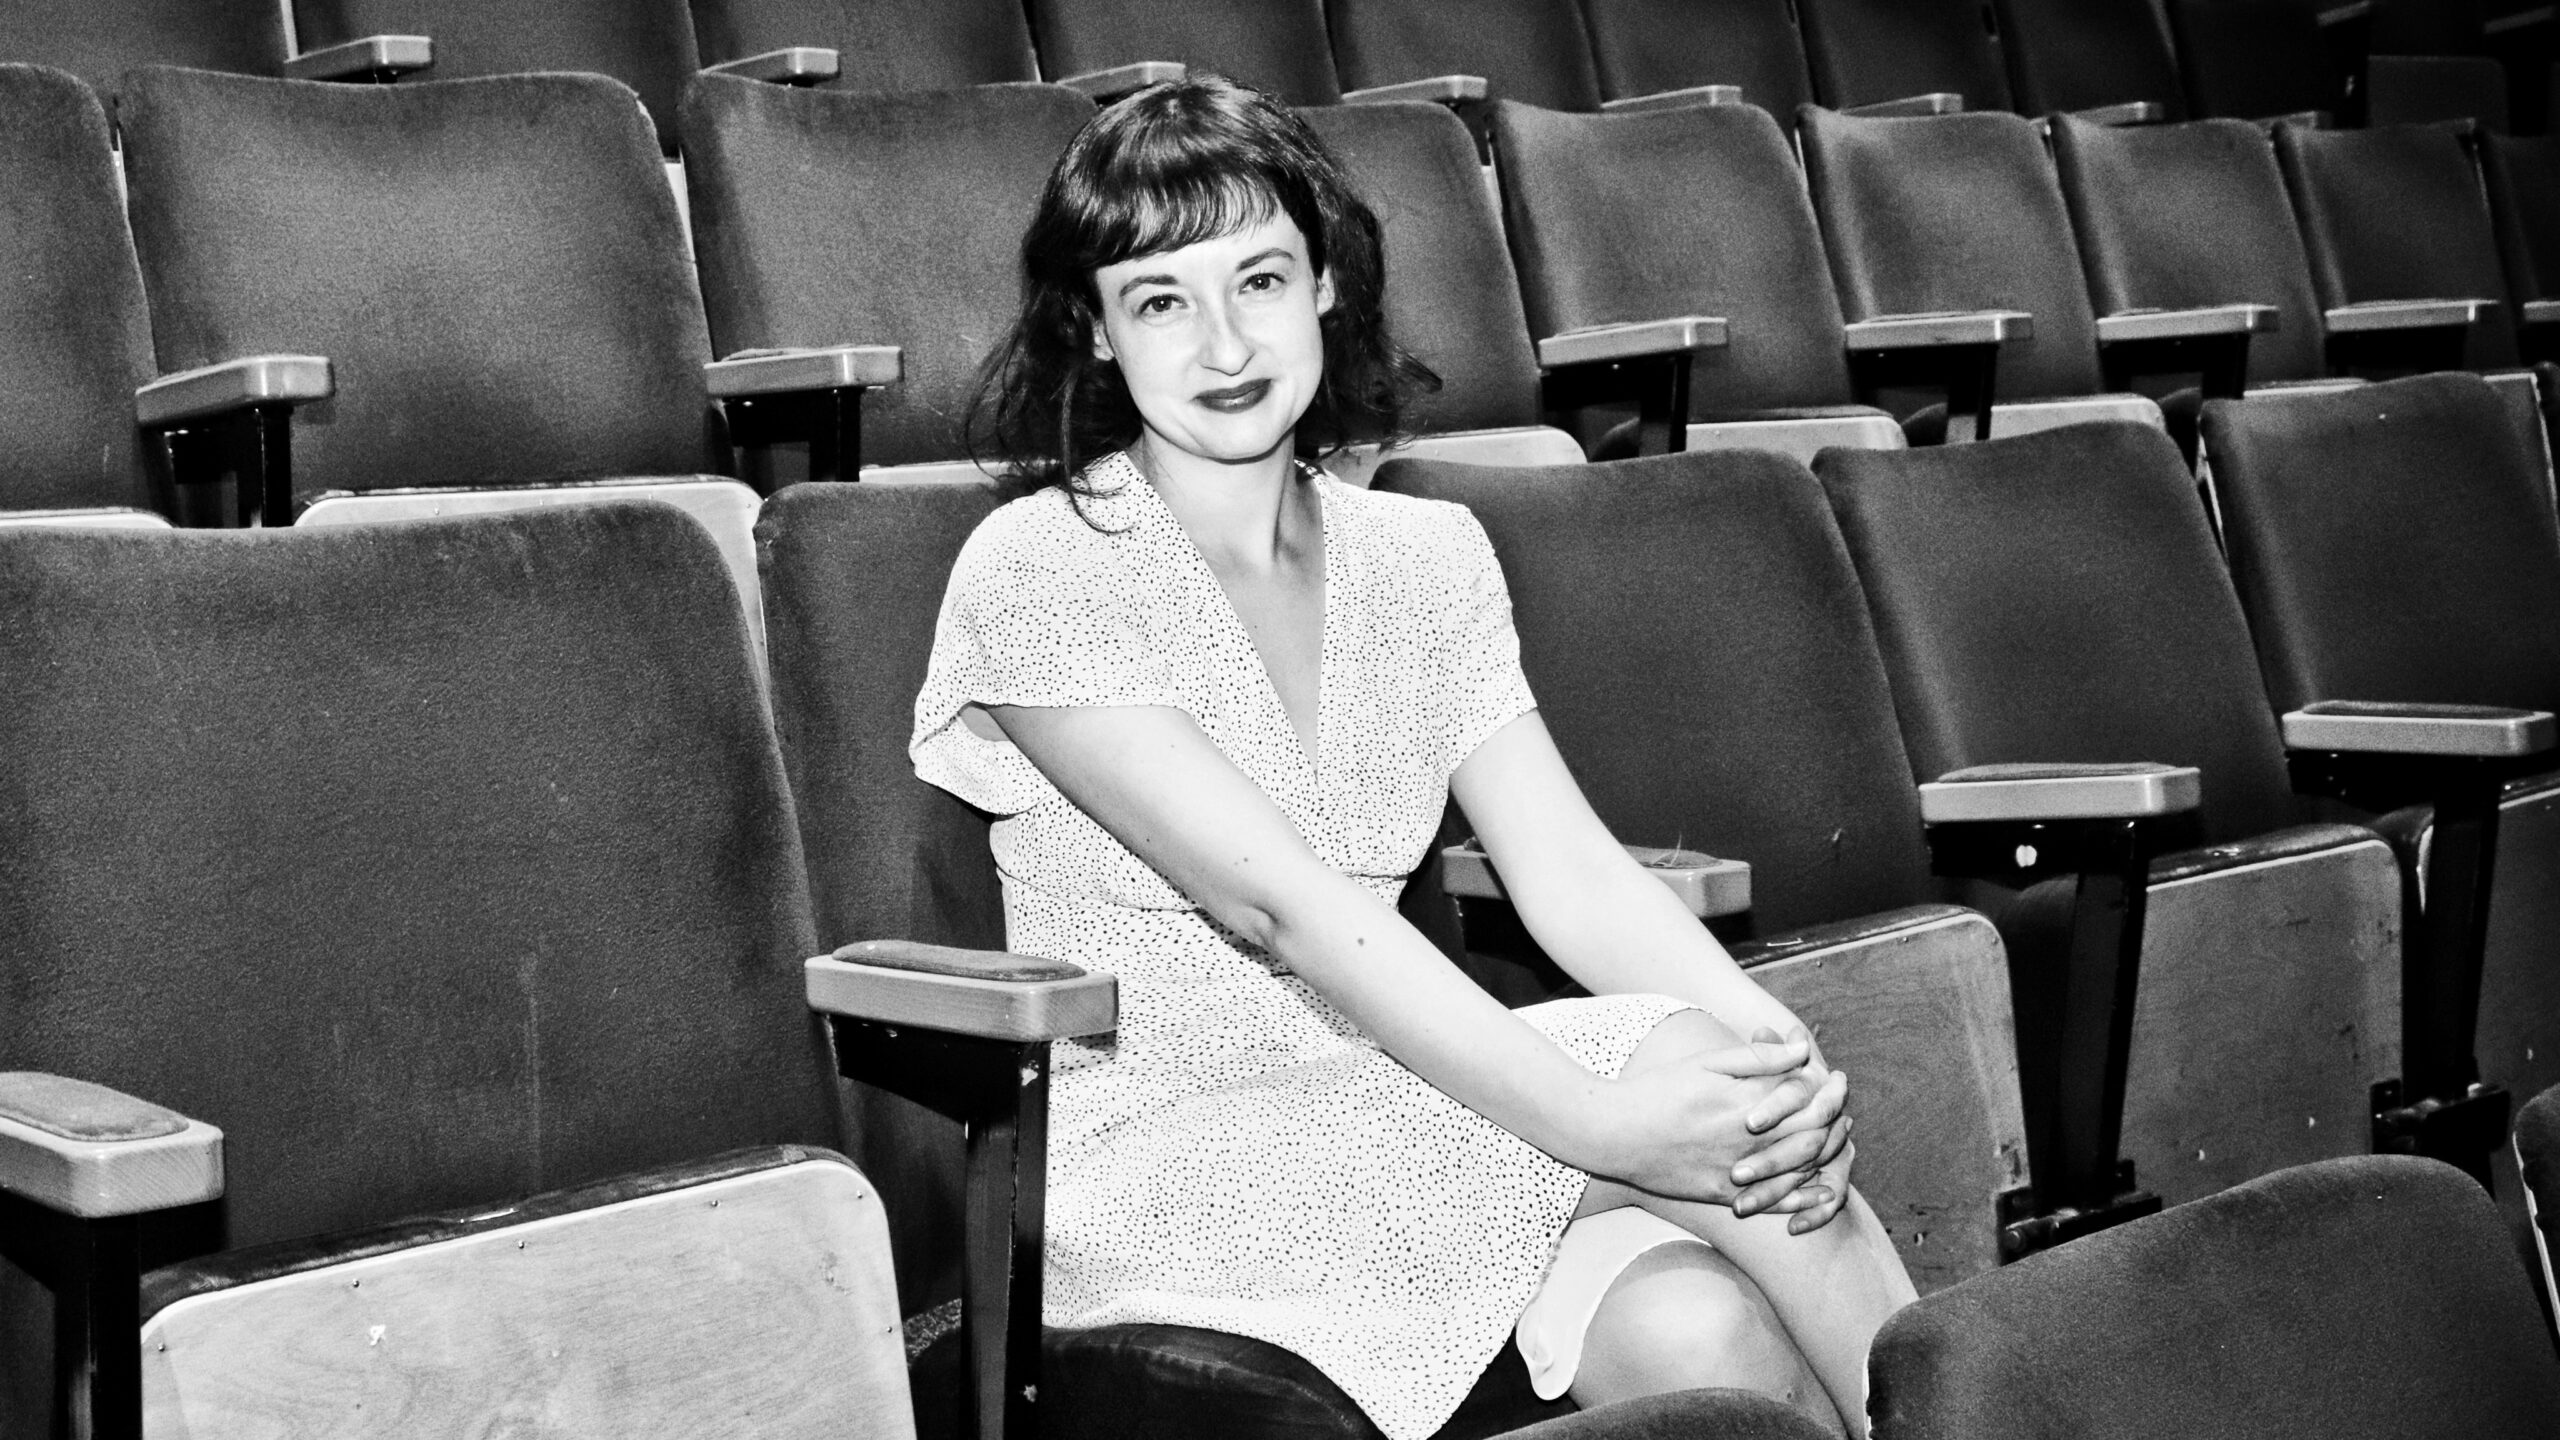 A picture of Chloe Wade, writer of As She Likes it, in black and white, as she sits in a theatre